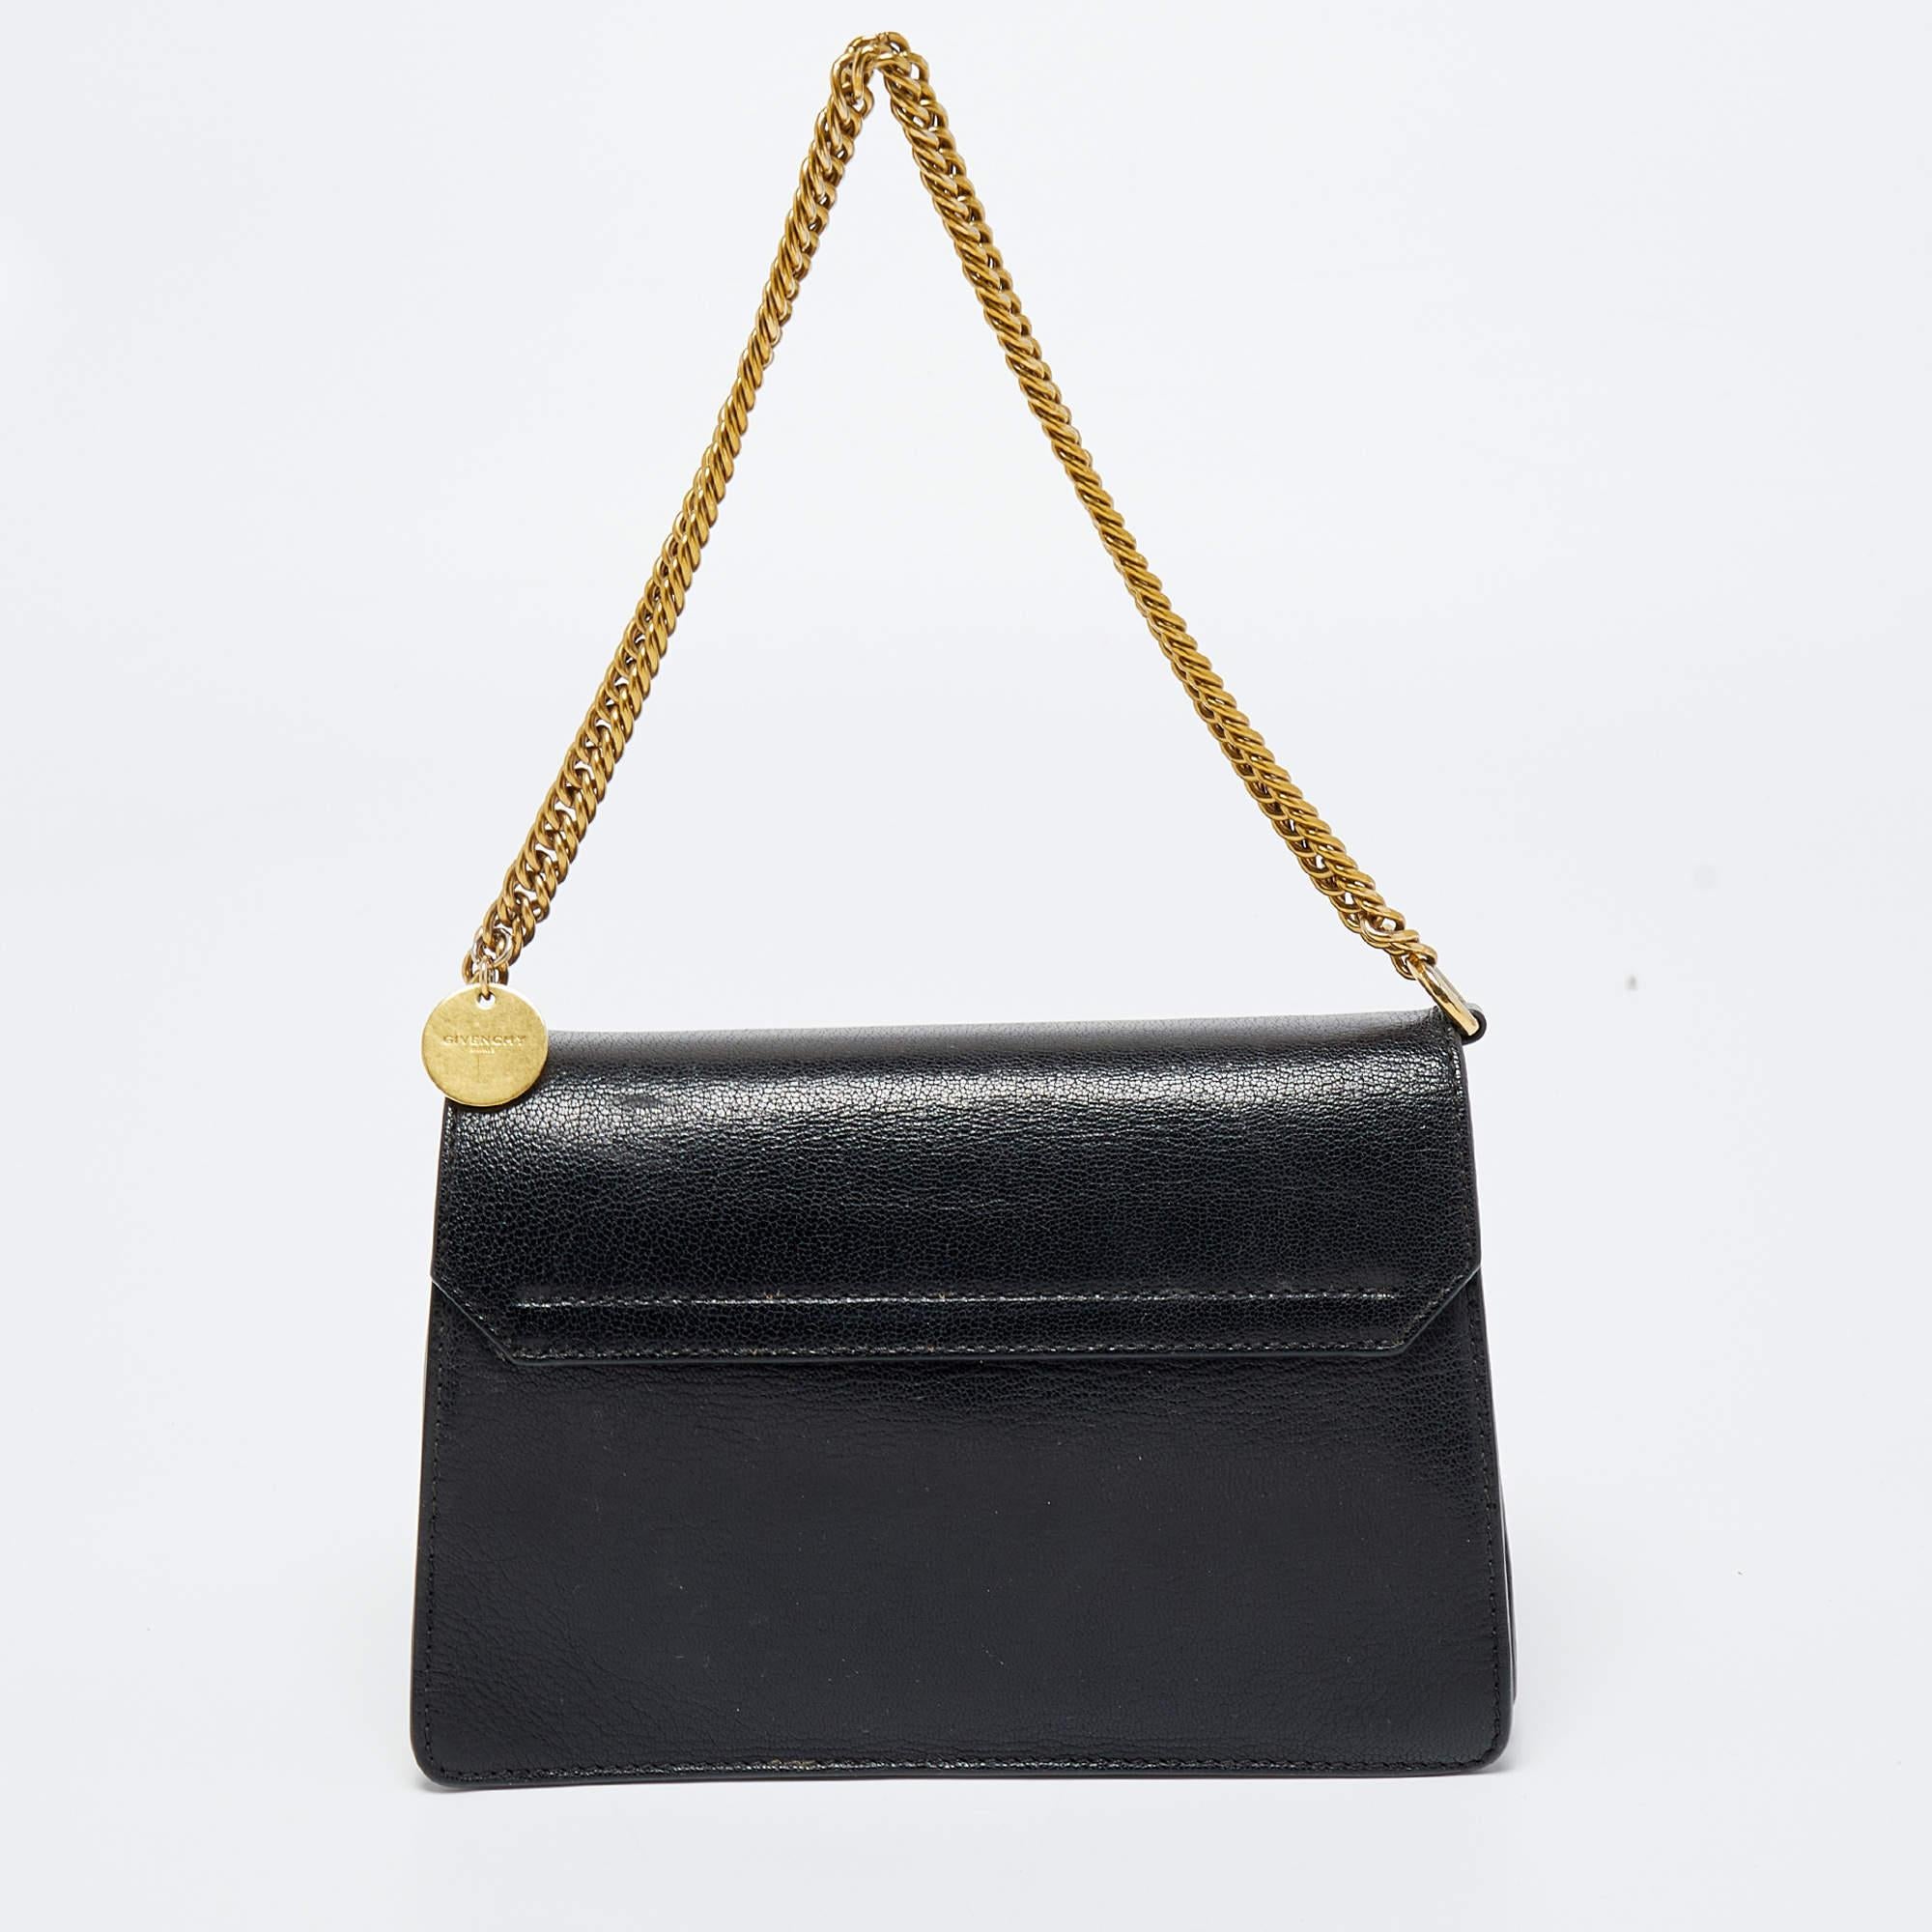 This Givenchy shoulder bag showcases the label's classy design attributes. It is made from leather & suede in a classy shade and added with a flap closure, a chain handle, and shoulder strap.

Includes: Original Dustbag, Detachable Strap
